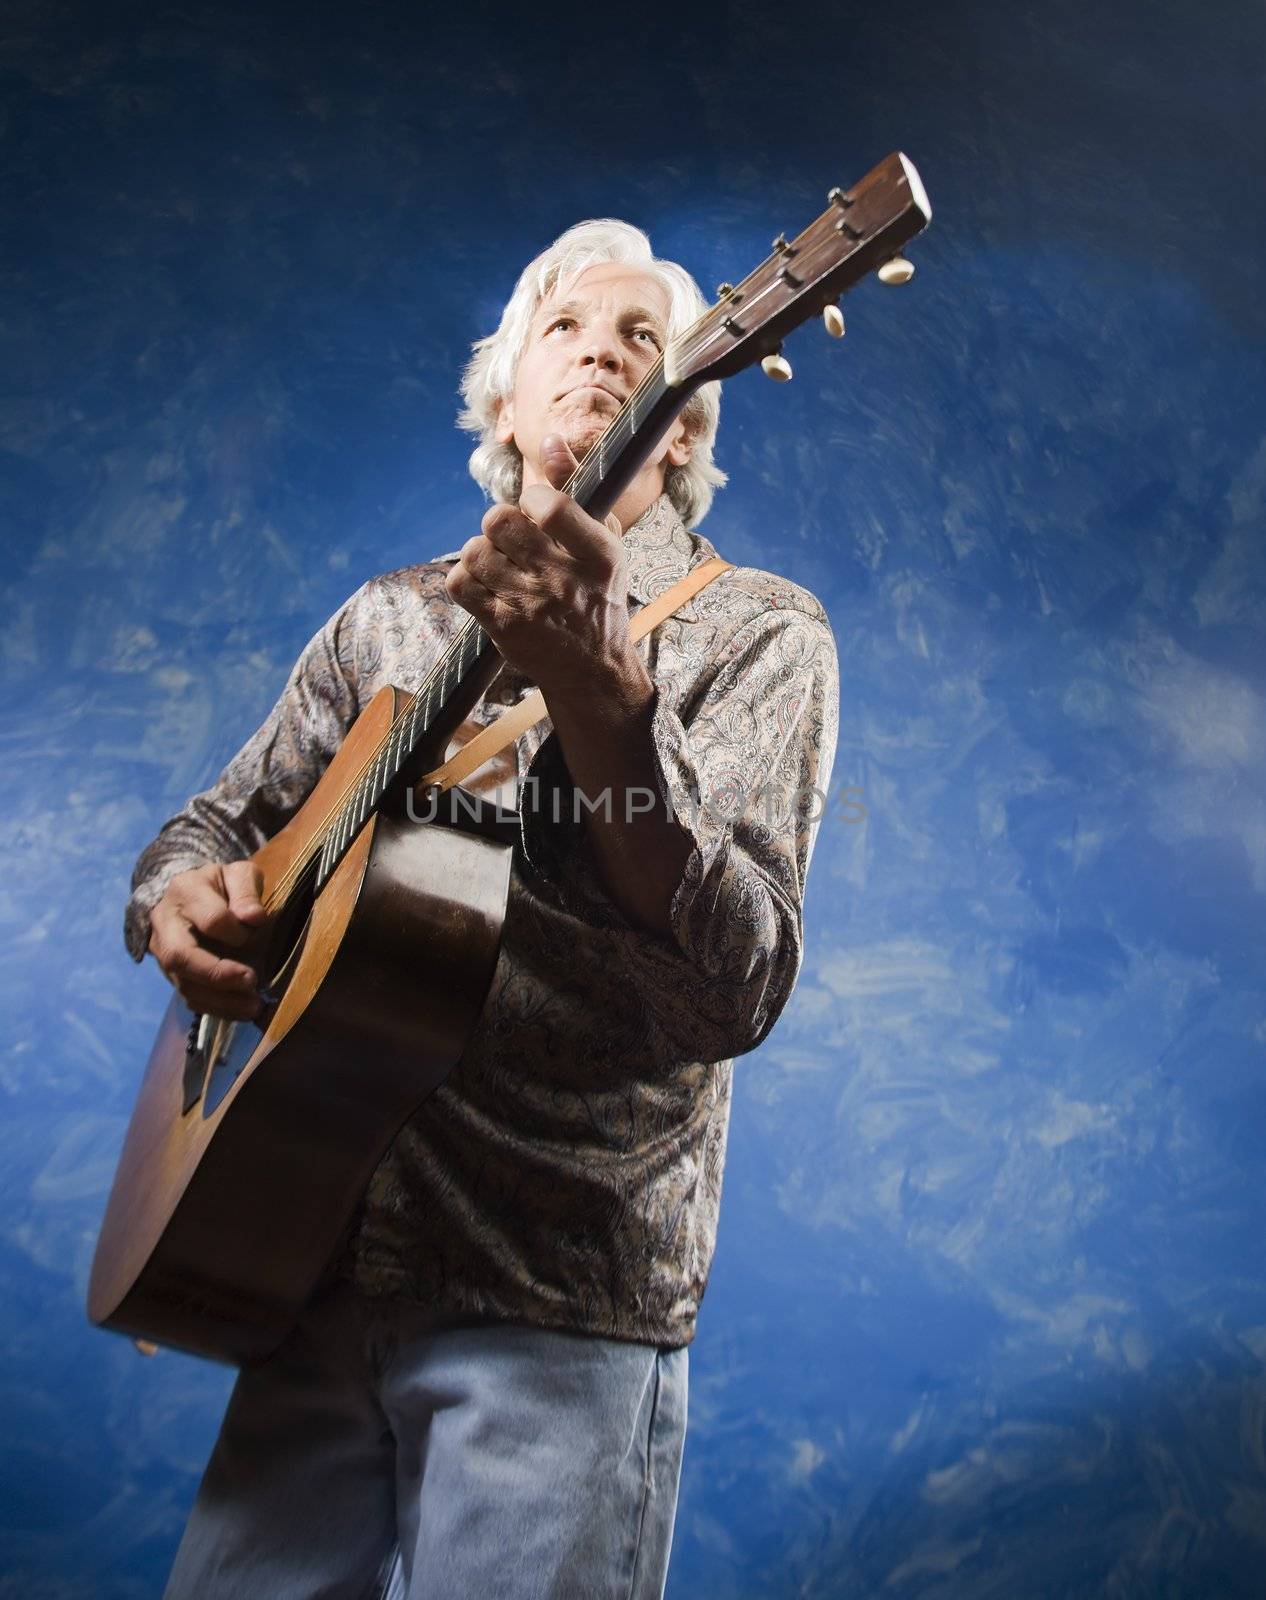 Guitarist with his Instrument in front of a Blue Wall